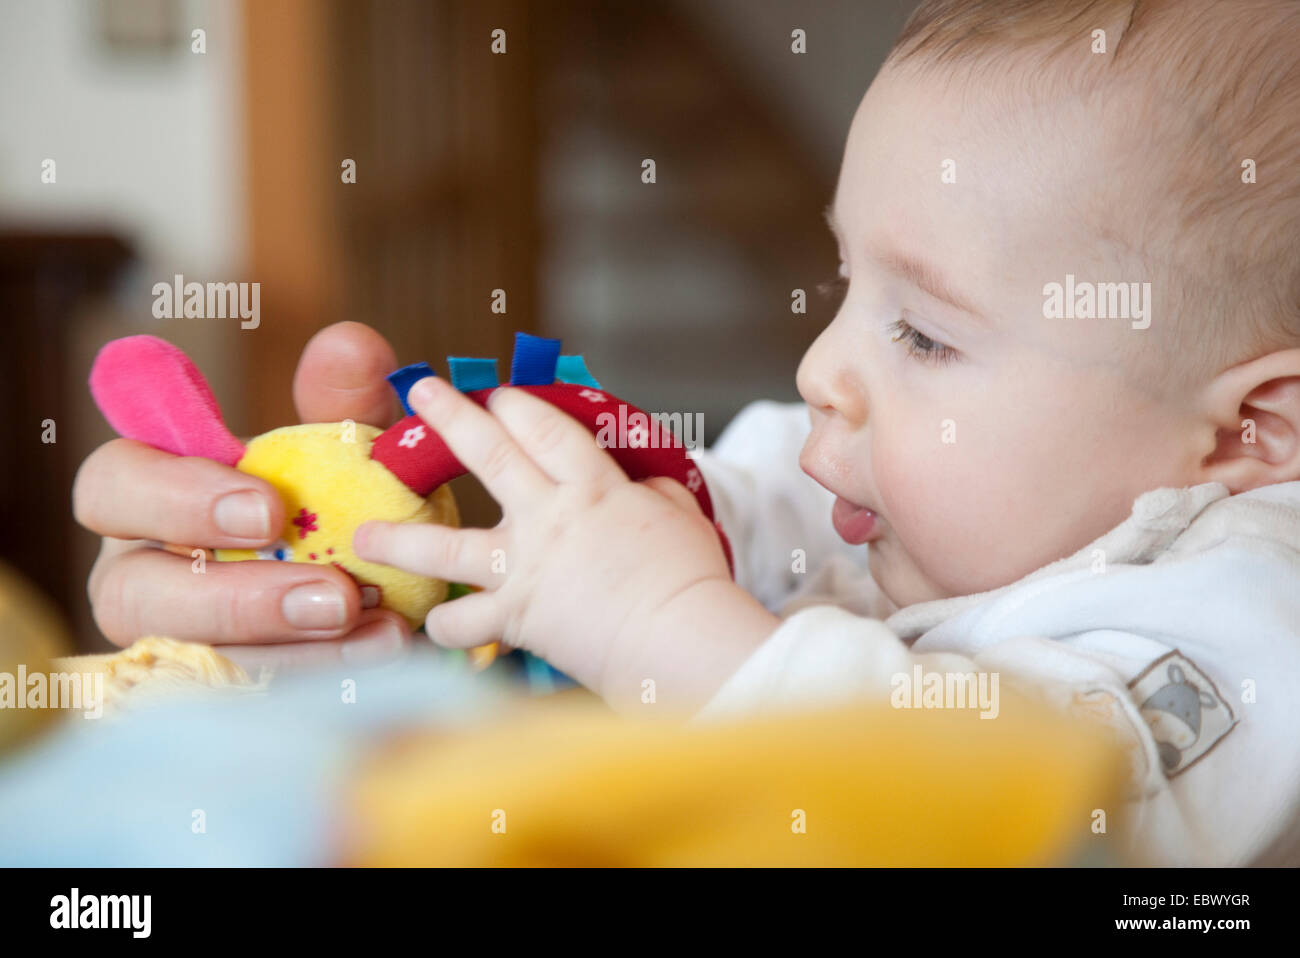 5 months old baby playing with toys Stock Photo